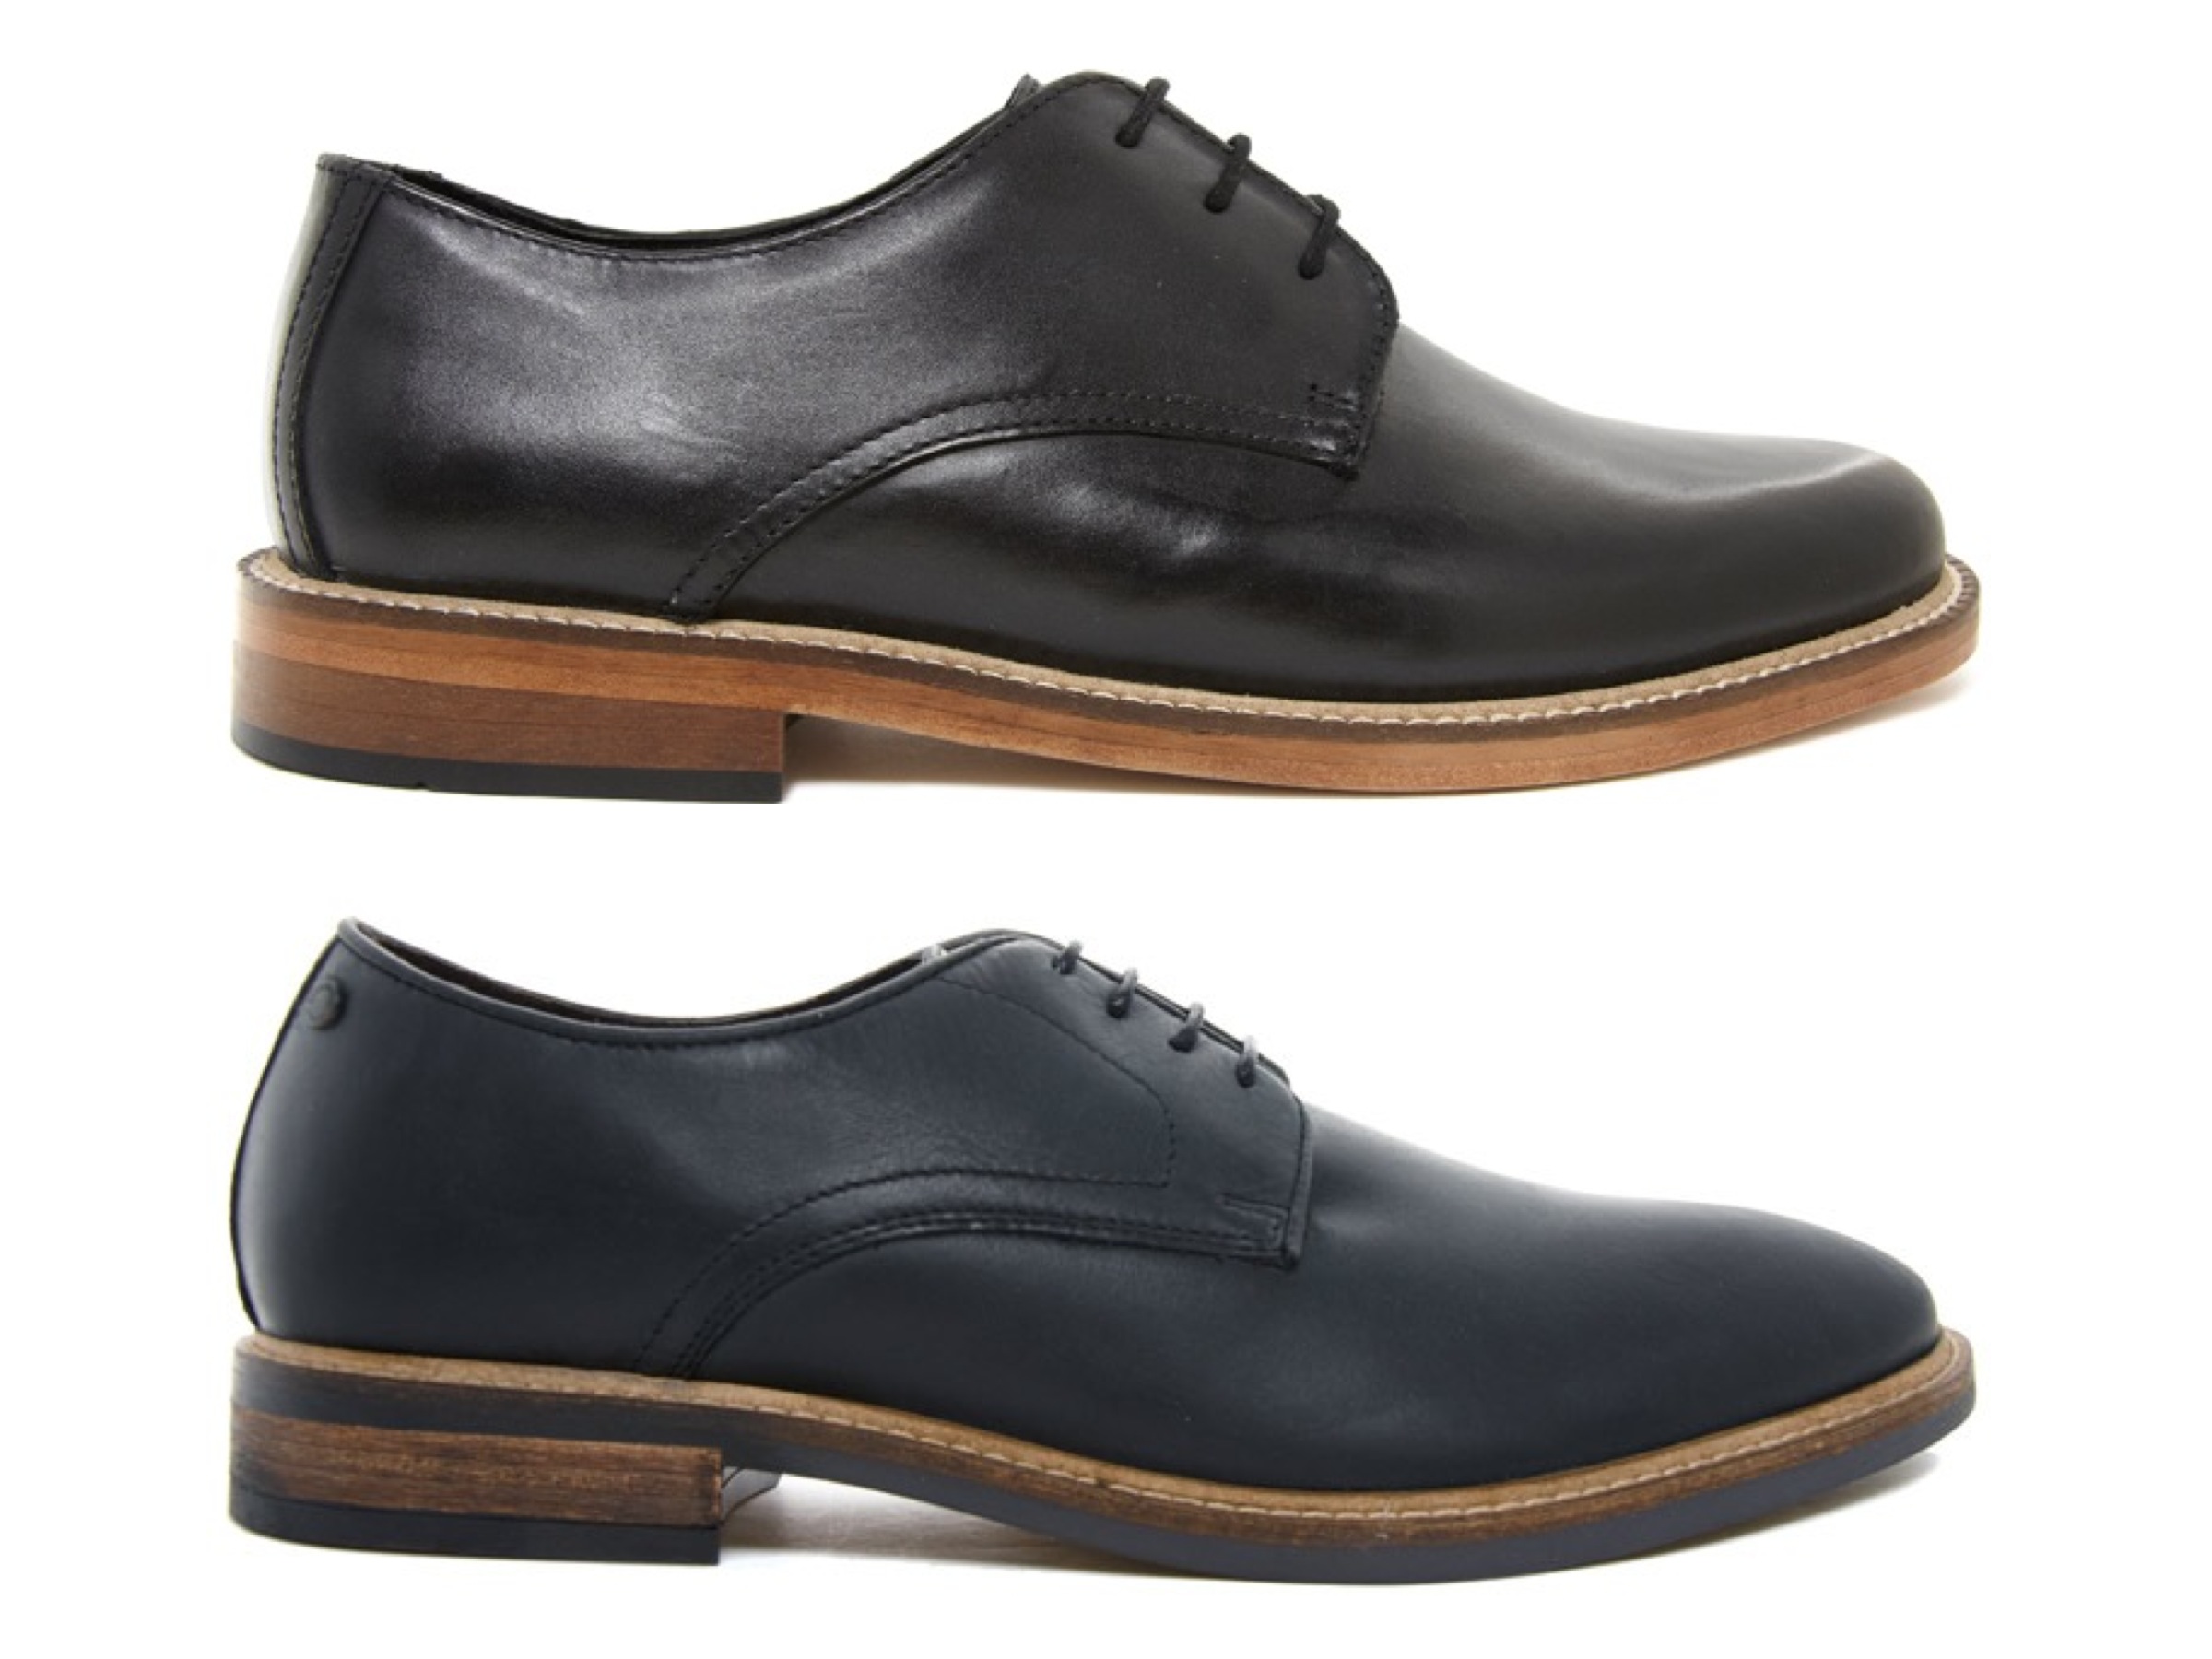 rubber soled dress shoes